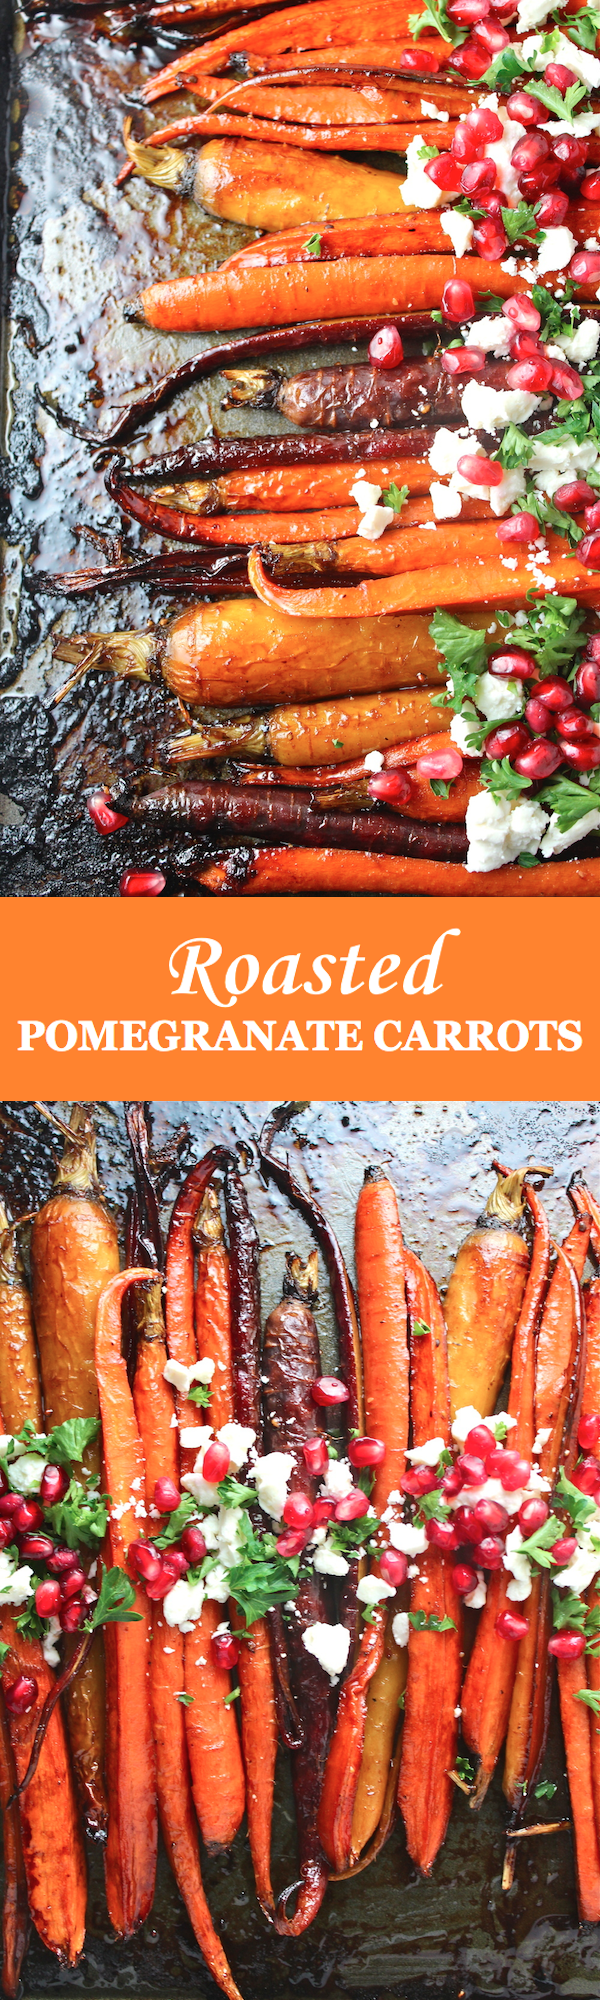 These perfectly caramelized Roasted Pomegranate Carrots are dressed up with pomegranate molasses! | The Millennial Cook #sidedish #vegetables #carrots #roastedcarrots #pomegranate